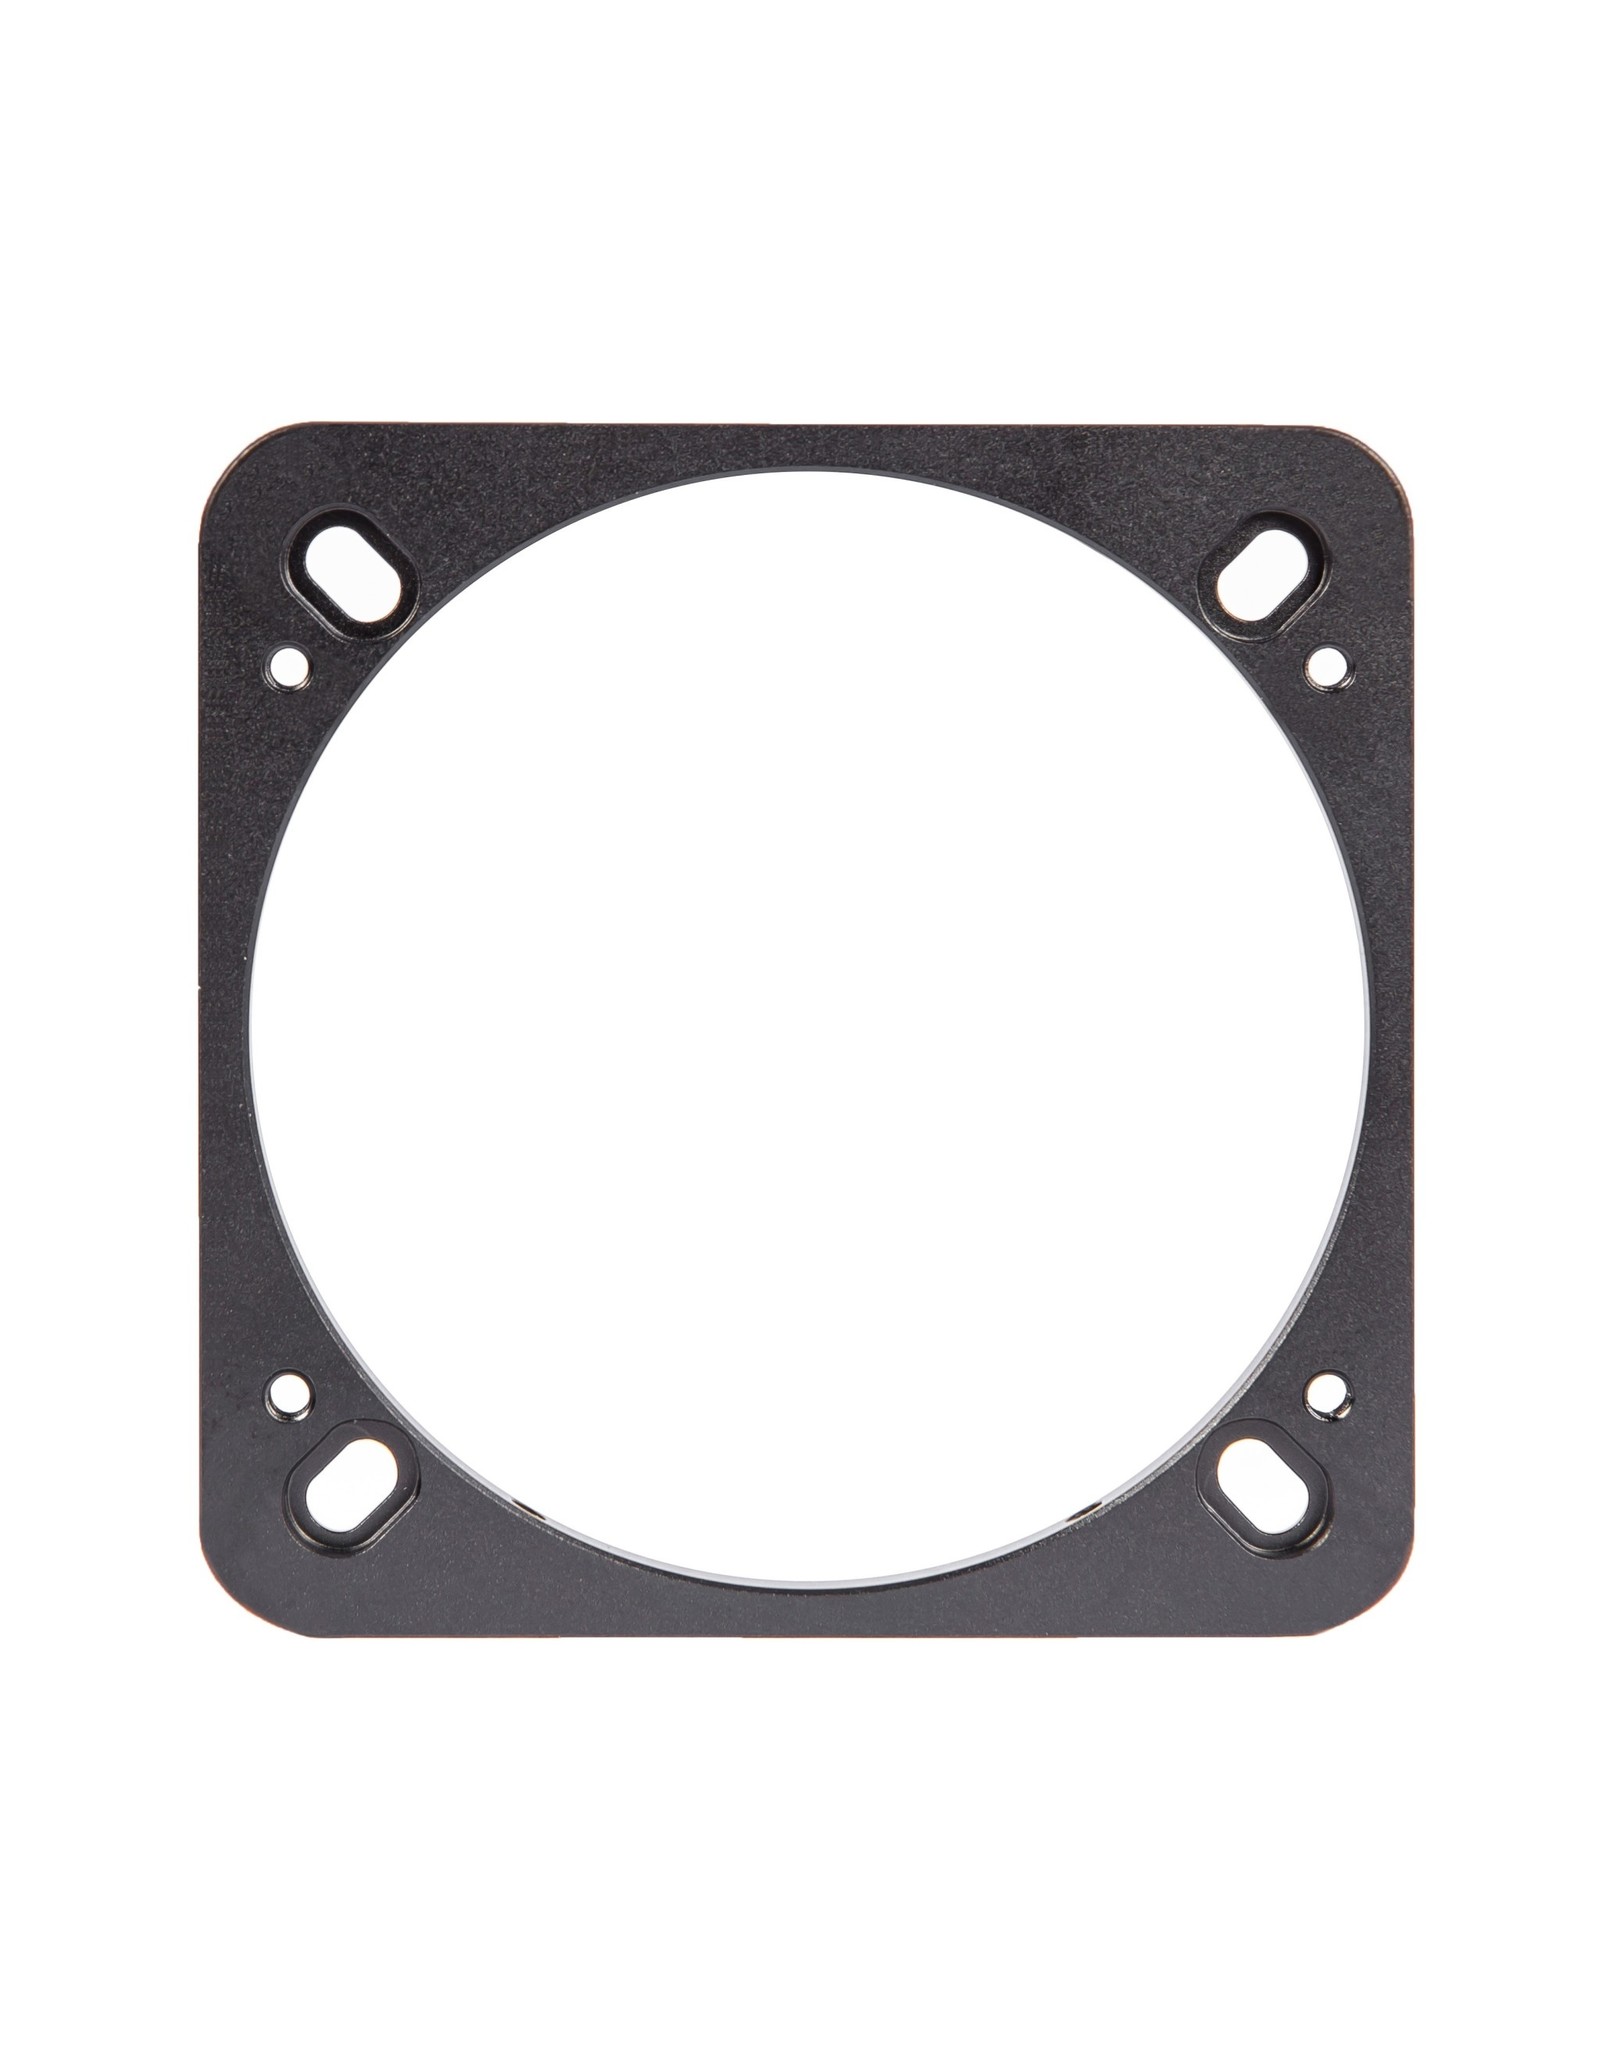 Baader Planetarium Baader Flat base plate (96x96mm) for BDS-NT